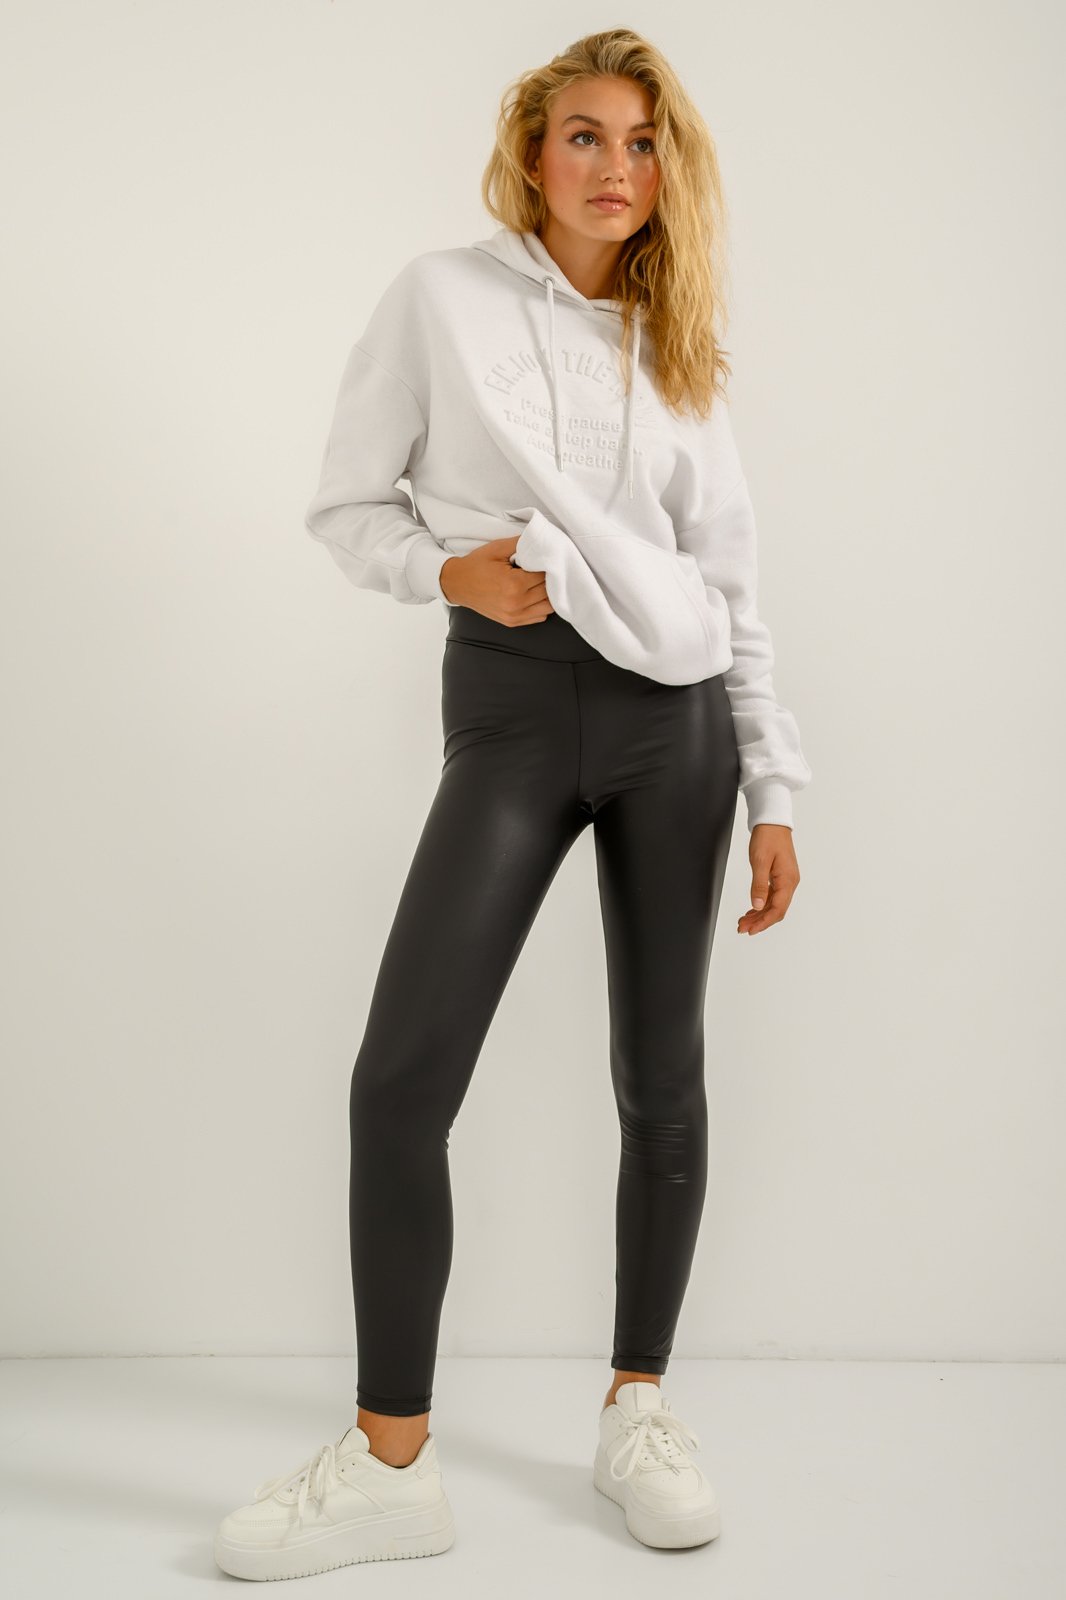 Leggings with leather effect